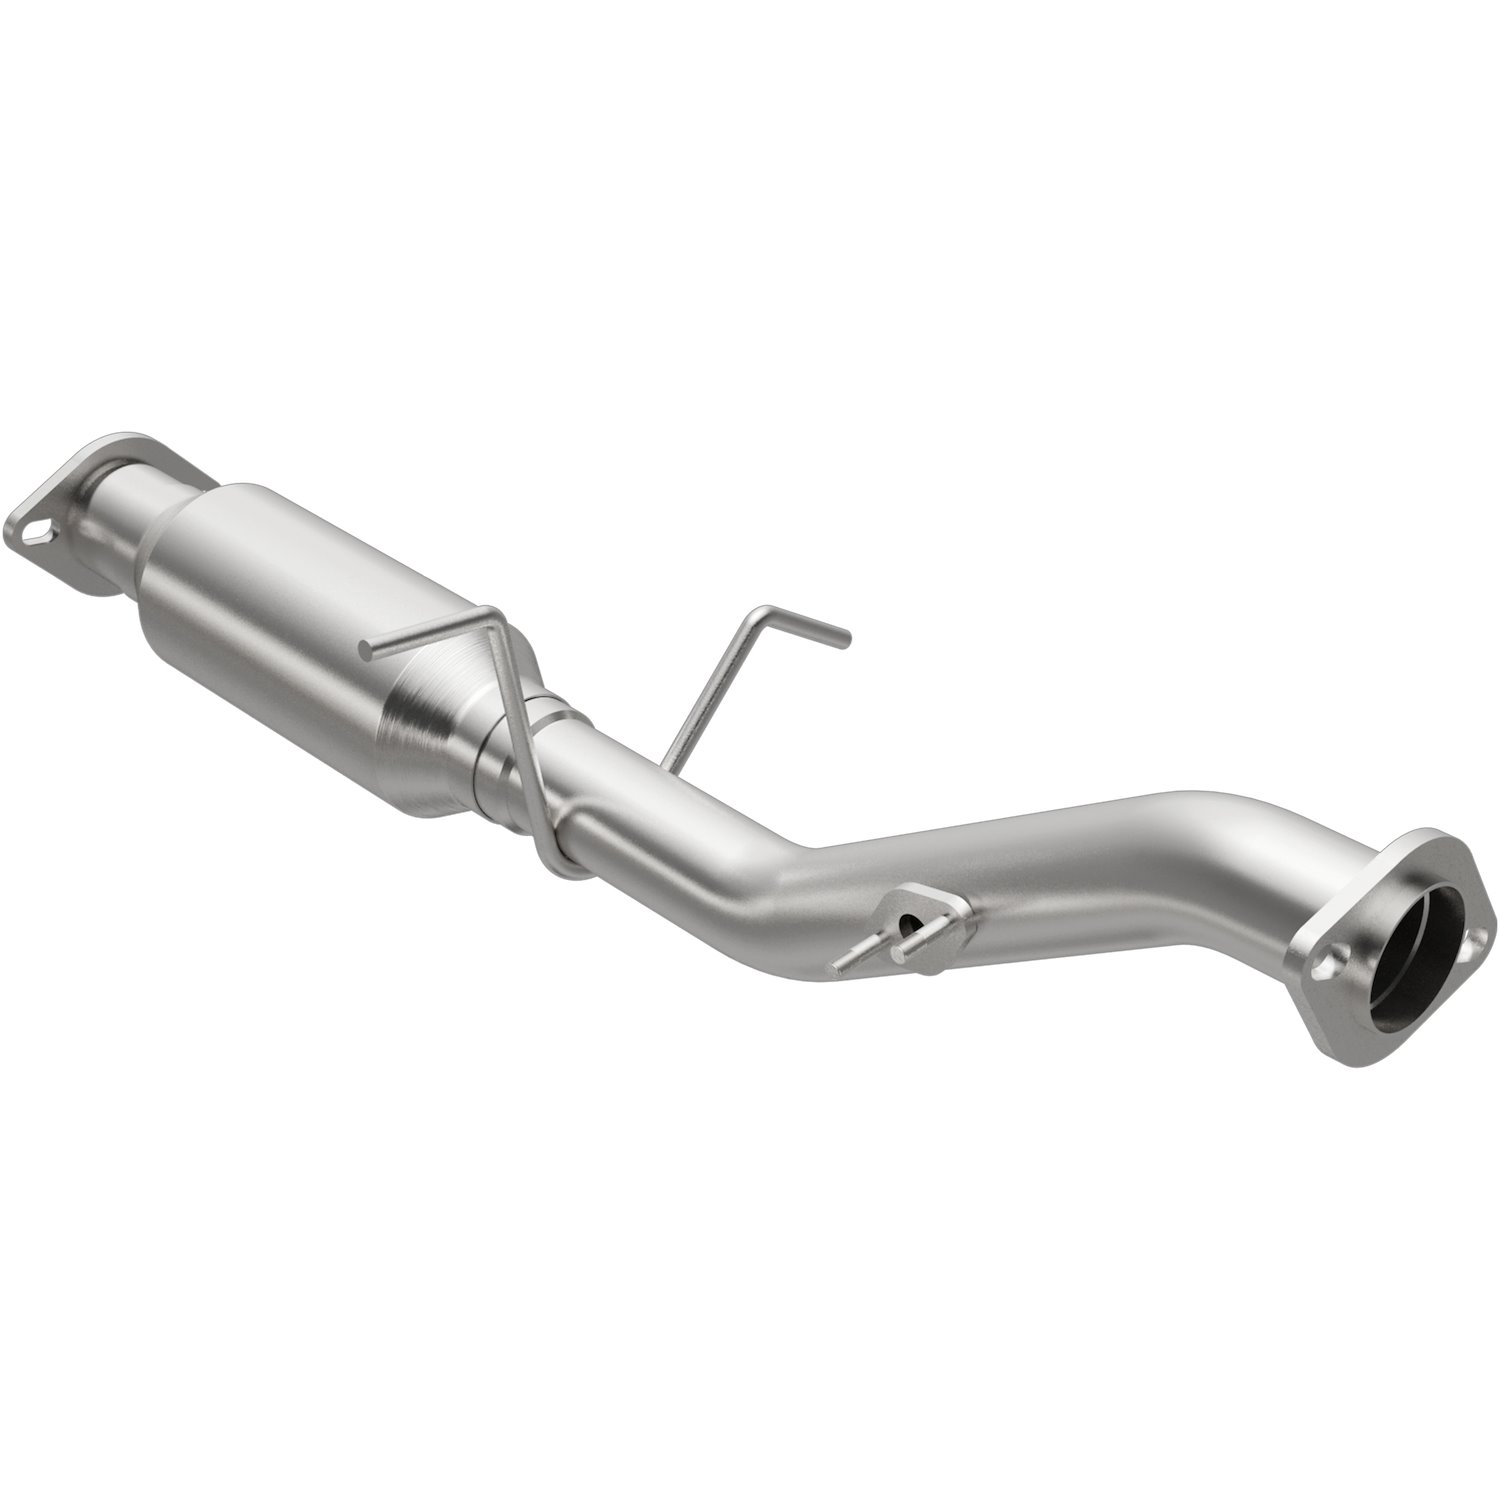 1995-1998 Toyota T100 California Grade CARB Compliant Direct-Fit Catalytic Converter